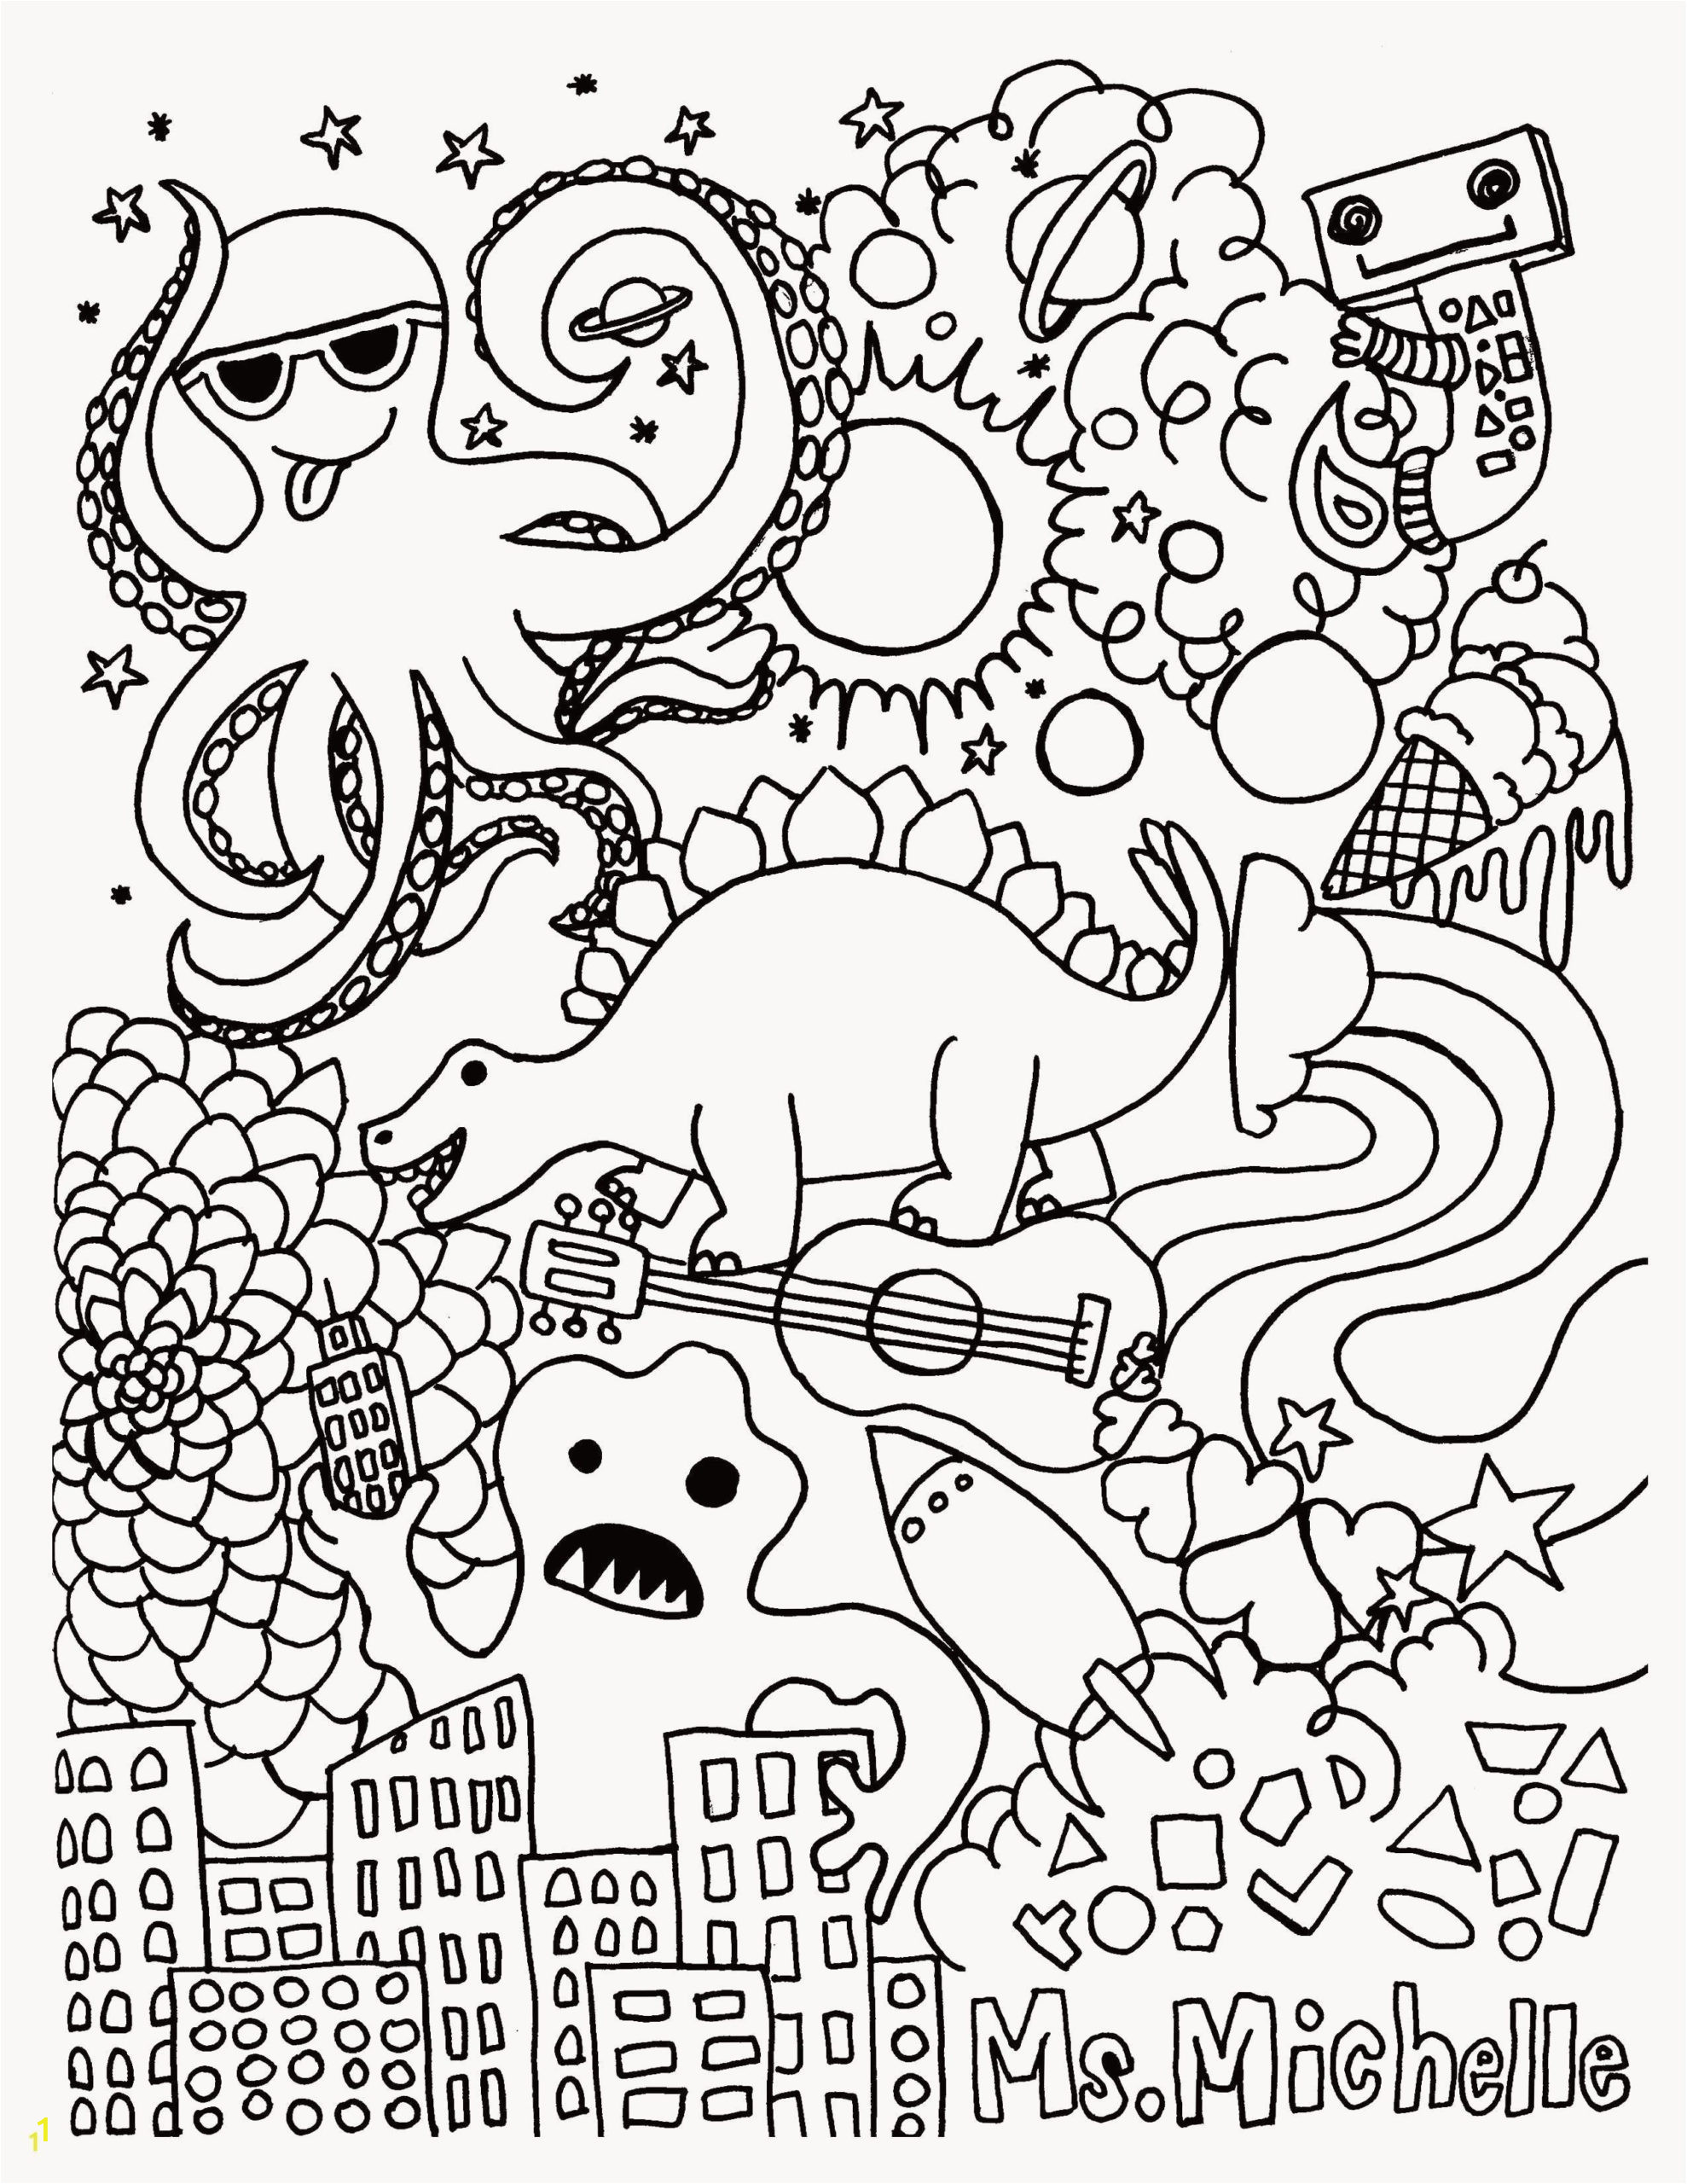 Hard Animal Coloring Pages Coloring Books Hard Coloring Pages for Adults Creative